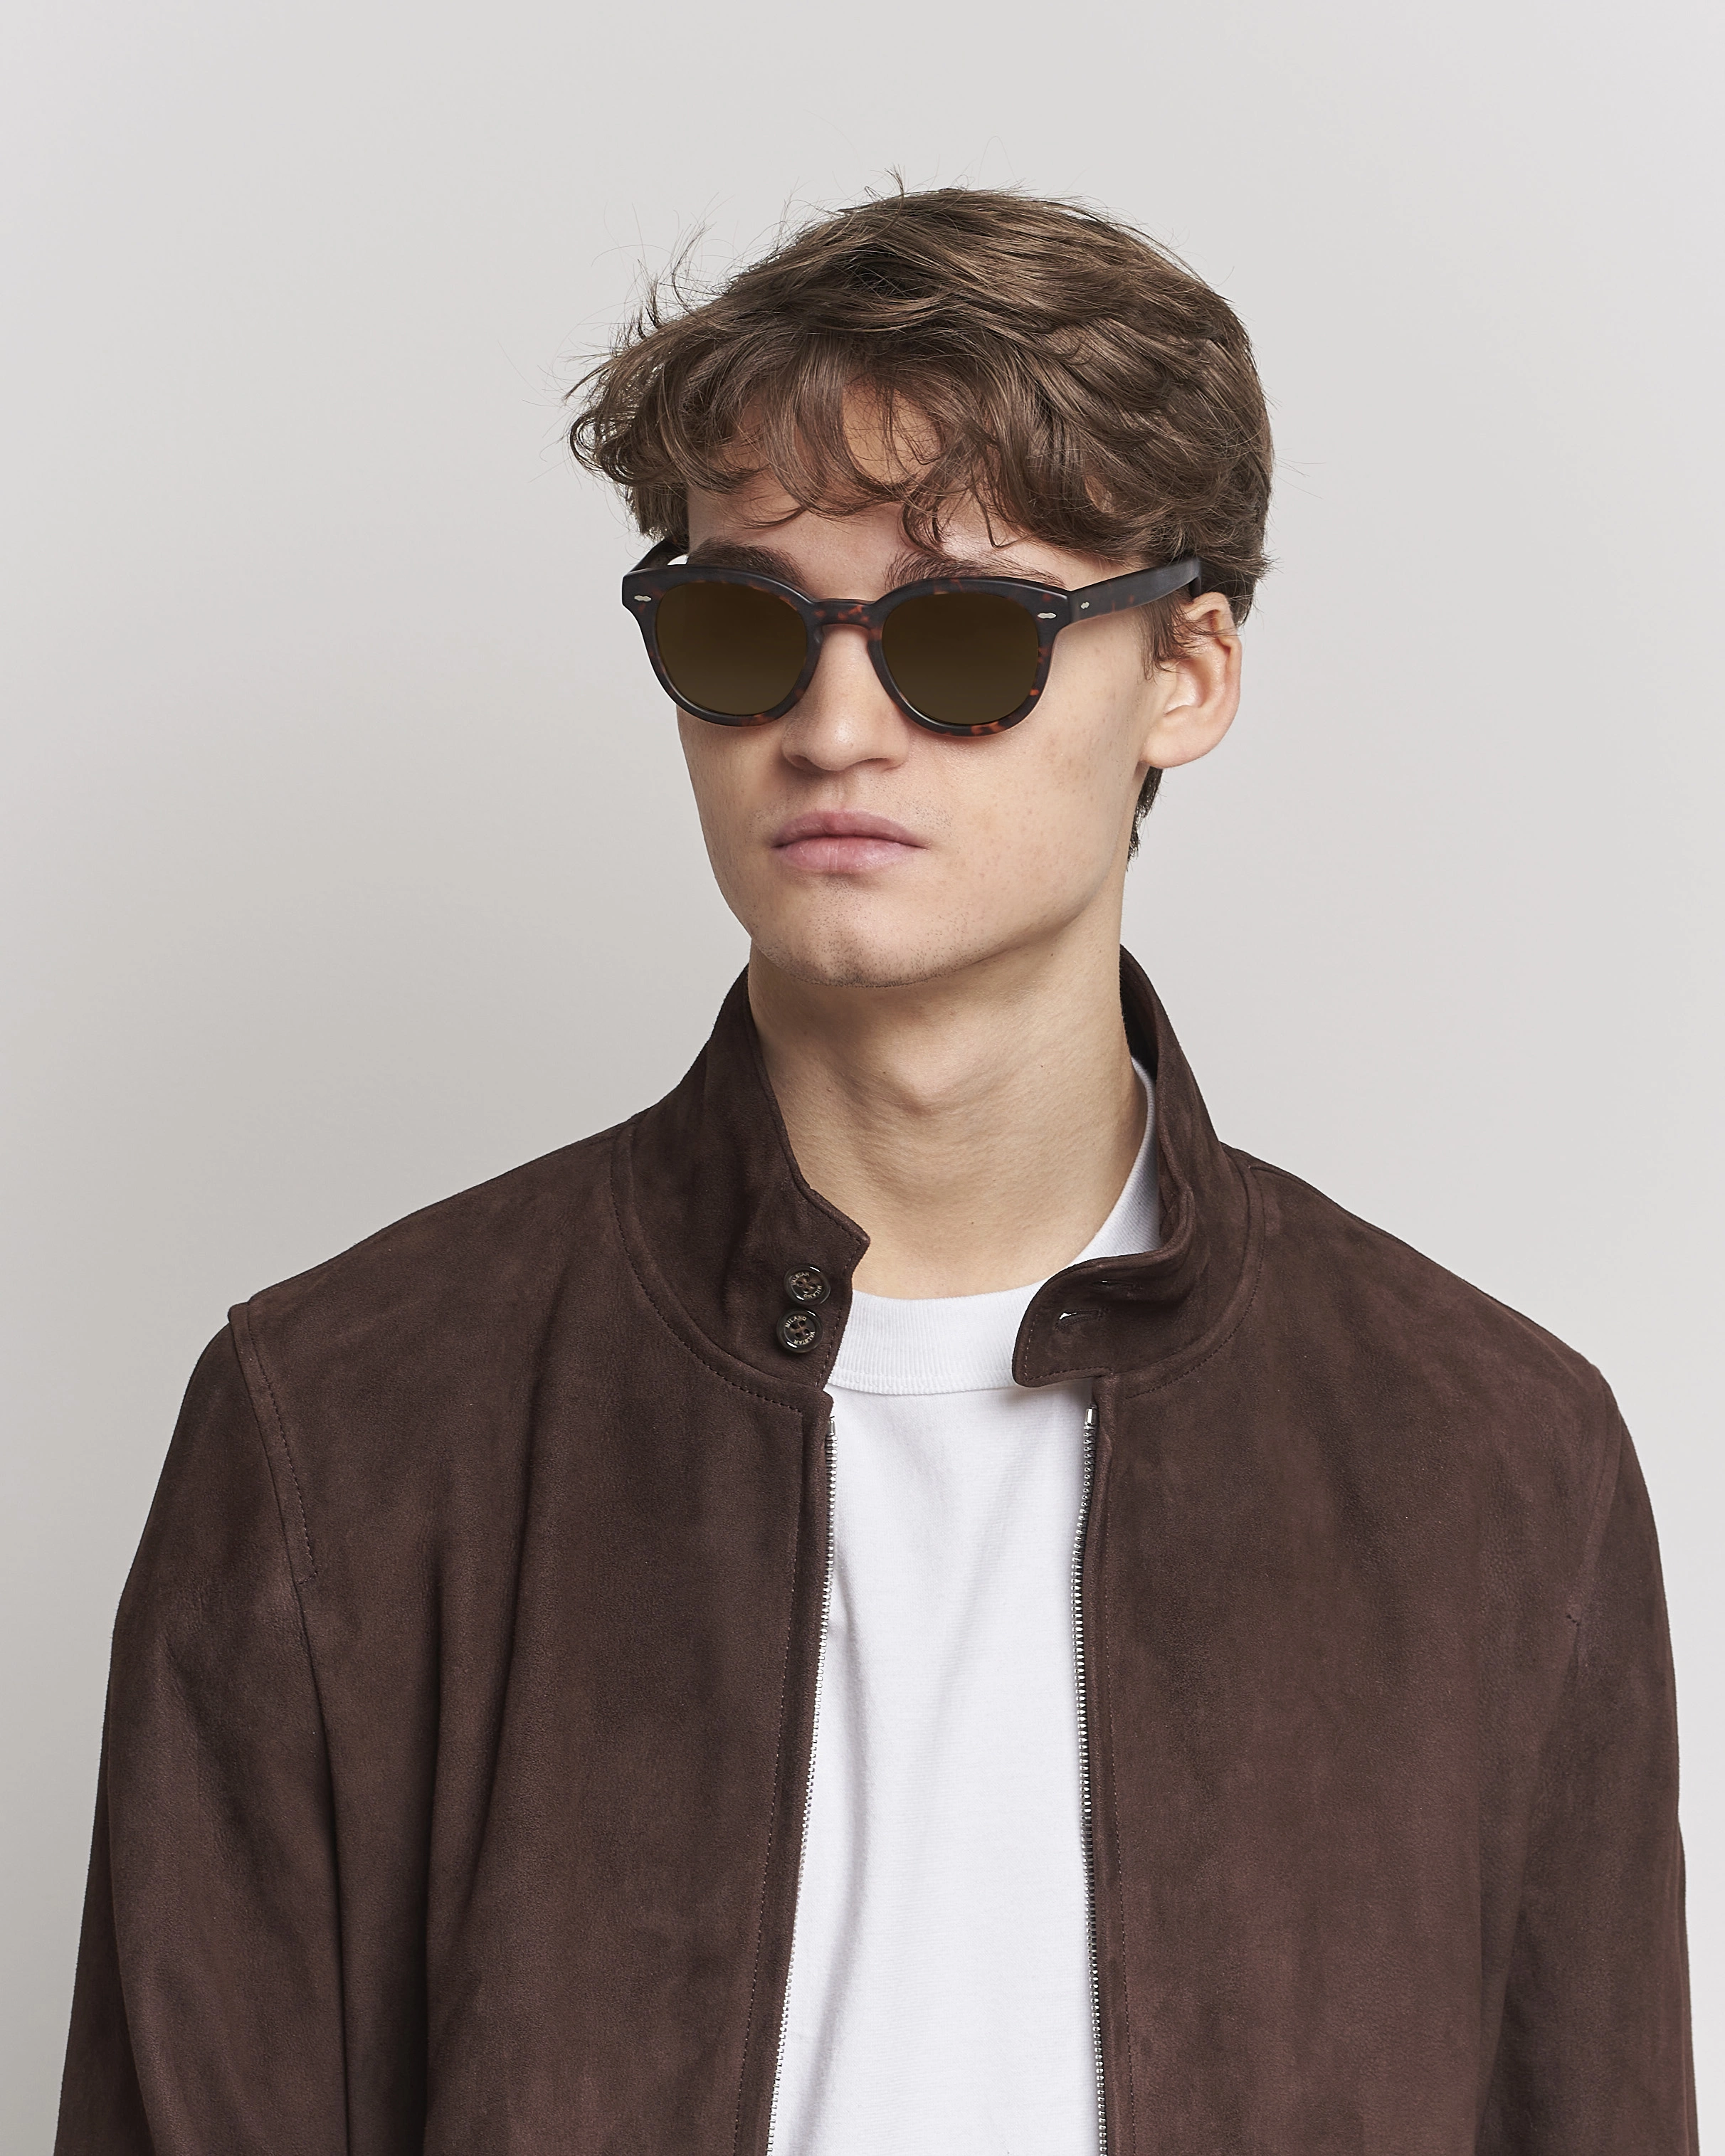 Homme |  | Oliver Peoples | Cary Grant Sunglasses Semi Matte Tortoise